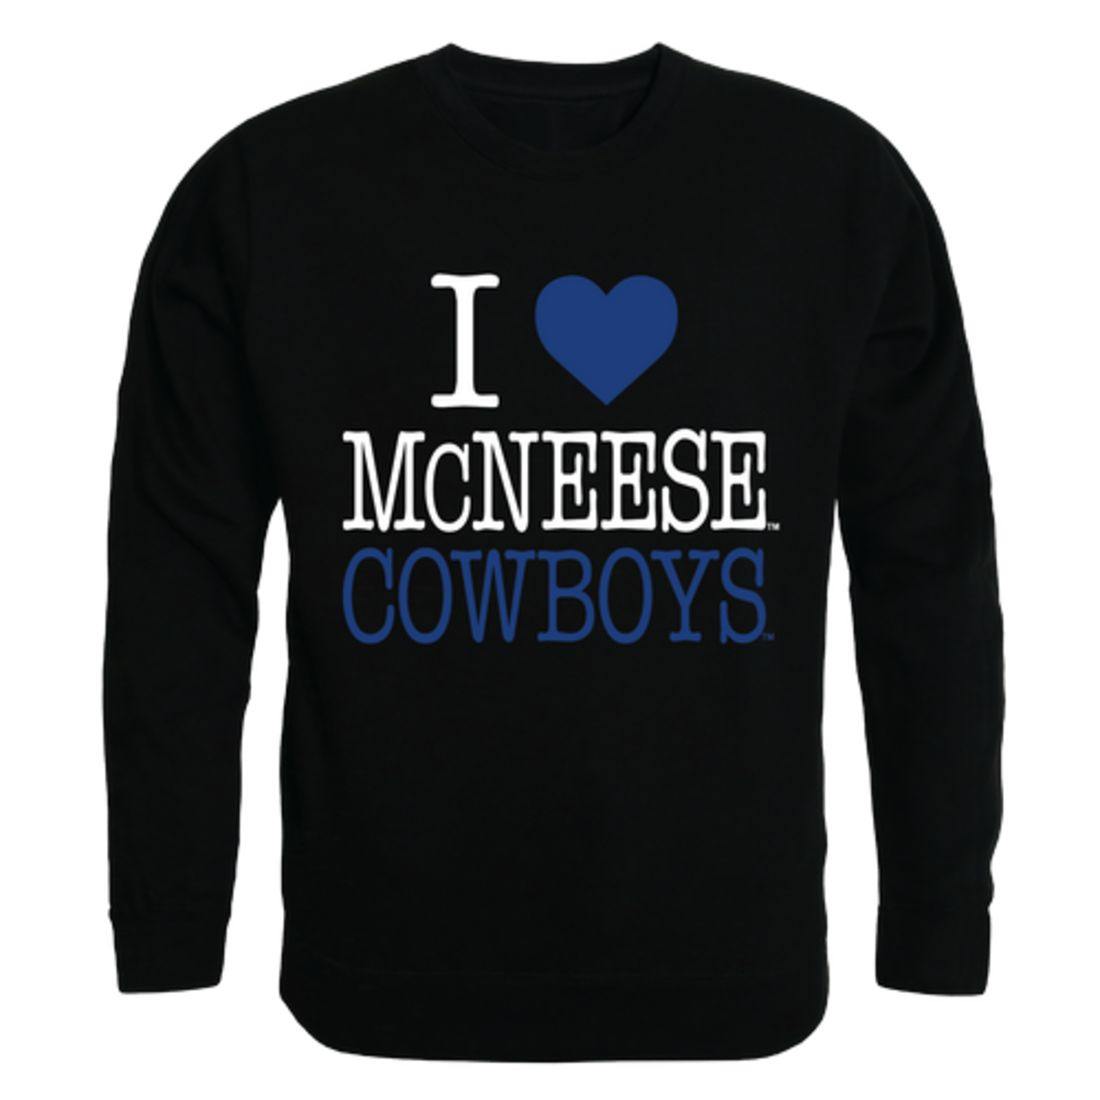 I Love McNeese State University Cowboys and Cowgirls Crewneck Pullover Sweatshirt Sweater-Campus-Wardrobe